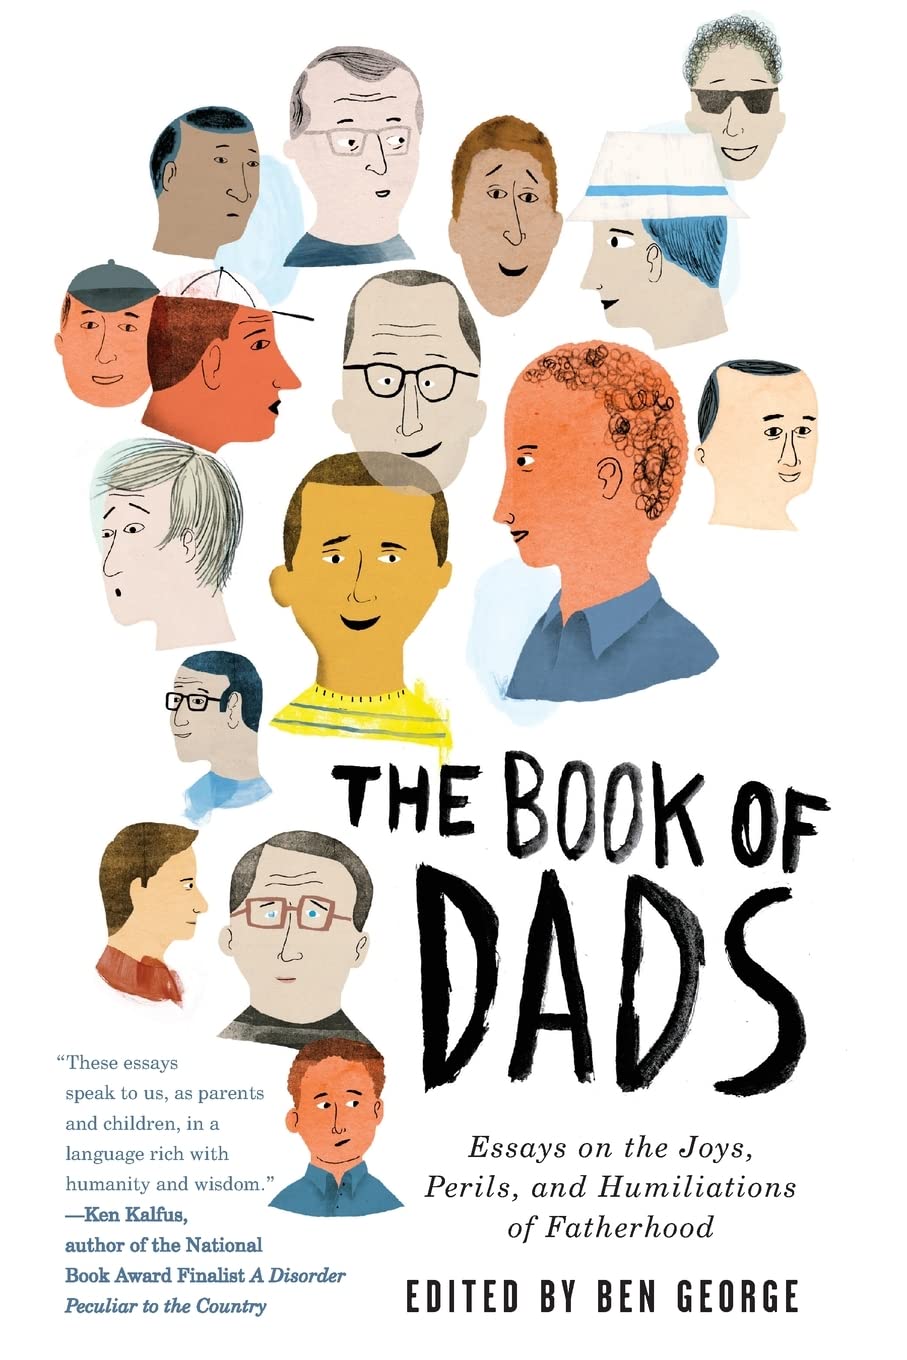 "The Book of Dads" Edited by Ben George